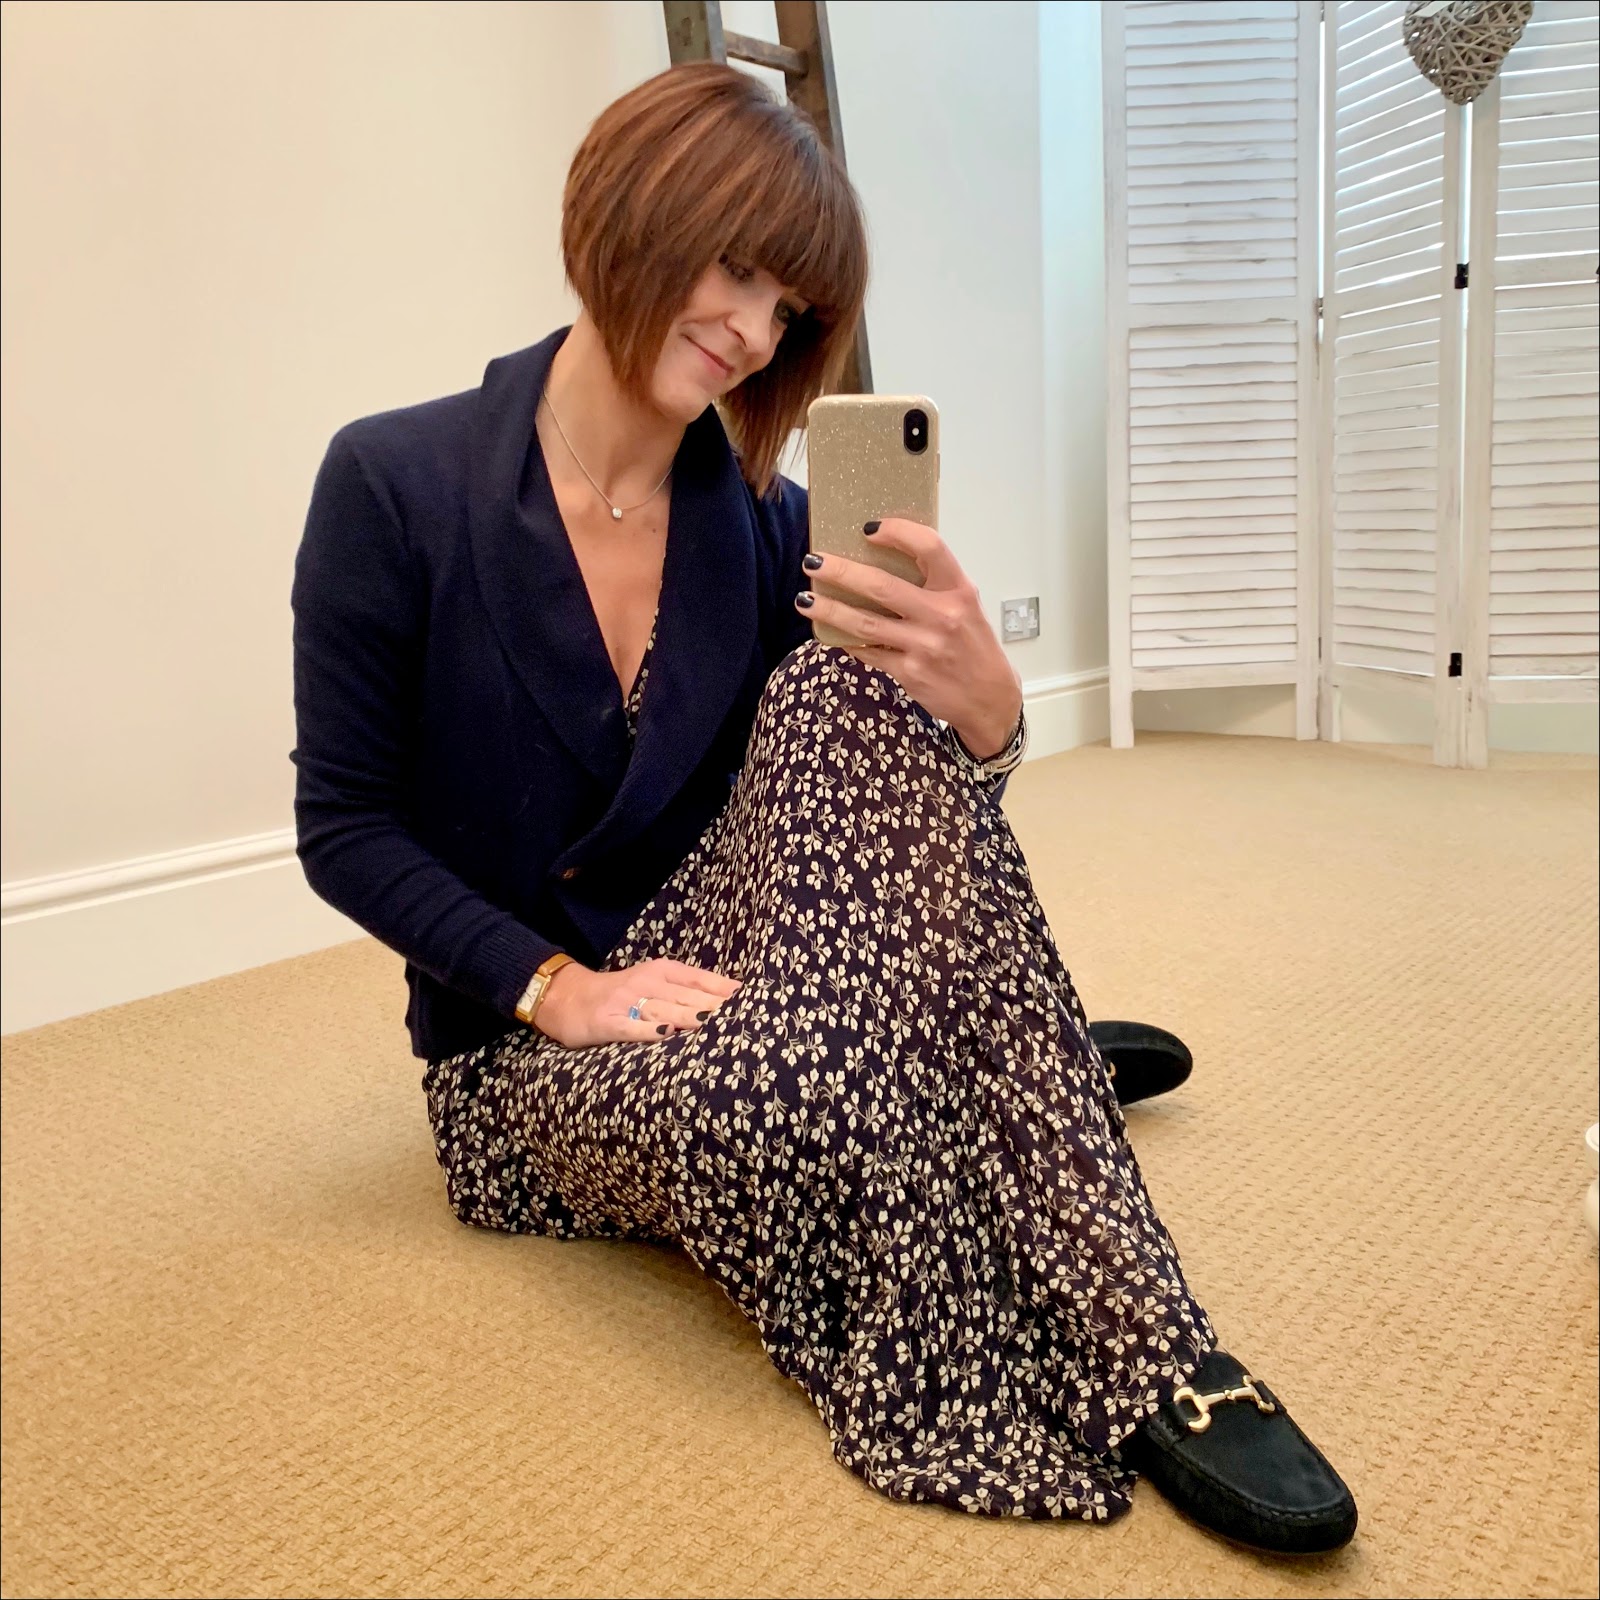 my midlife fashion, jones bootmaker ella leather loafers, ralph lauren double breasted knitted jacket, ganni floral maxi dress